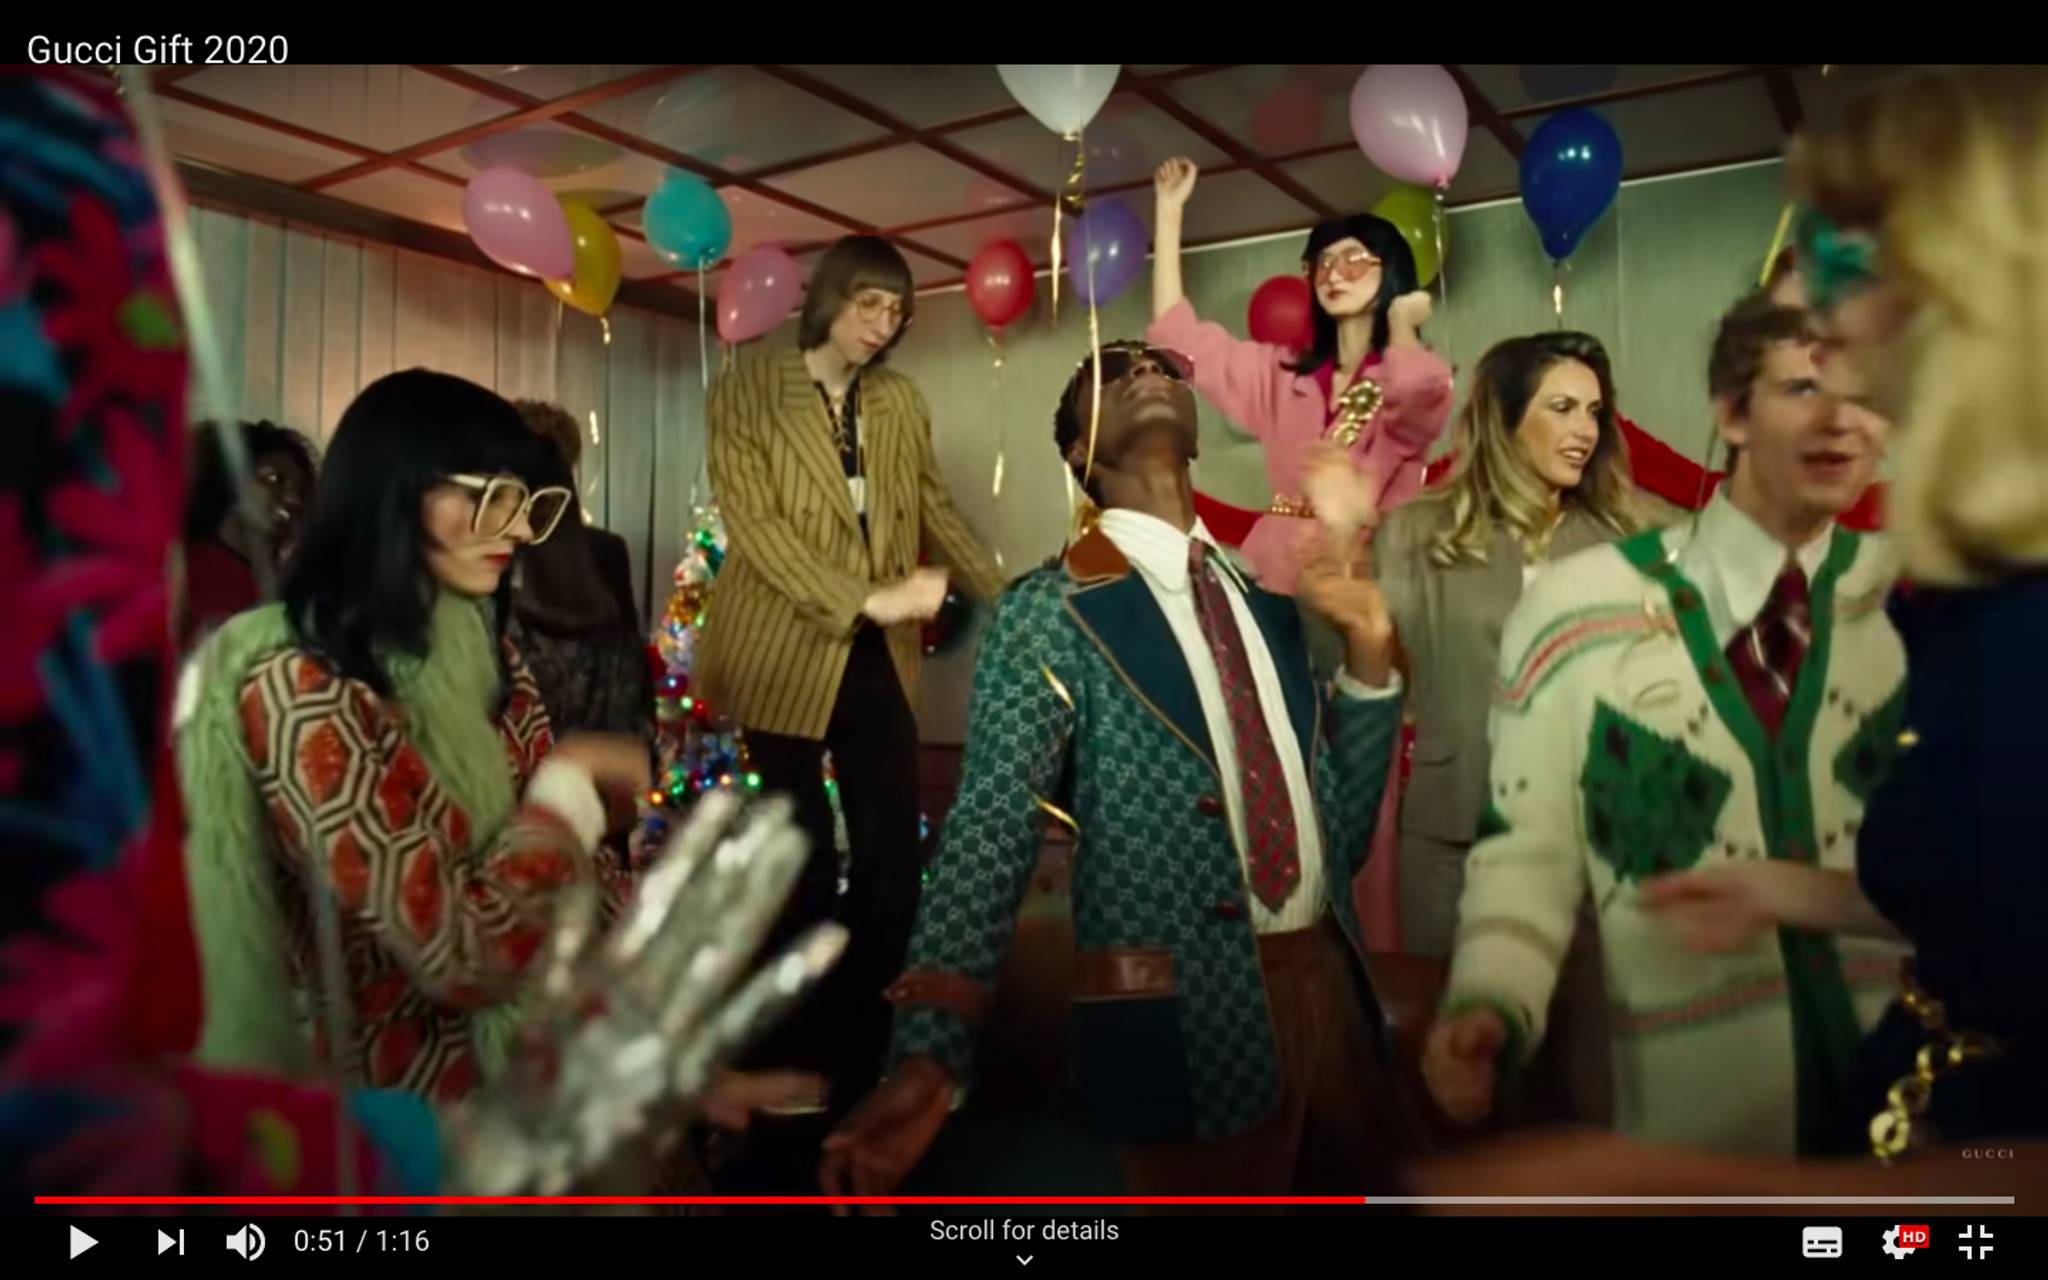 Gucci’s Xmas spot chimes with workplace nostalgia